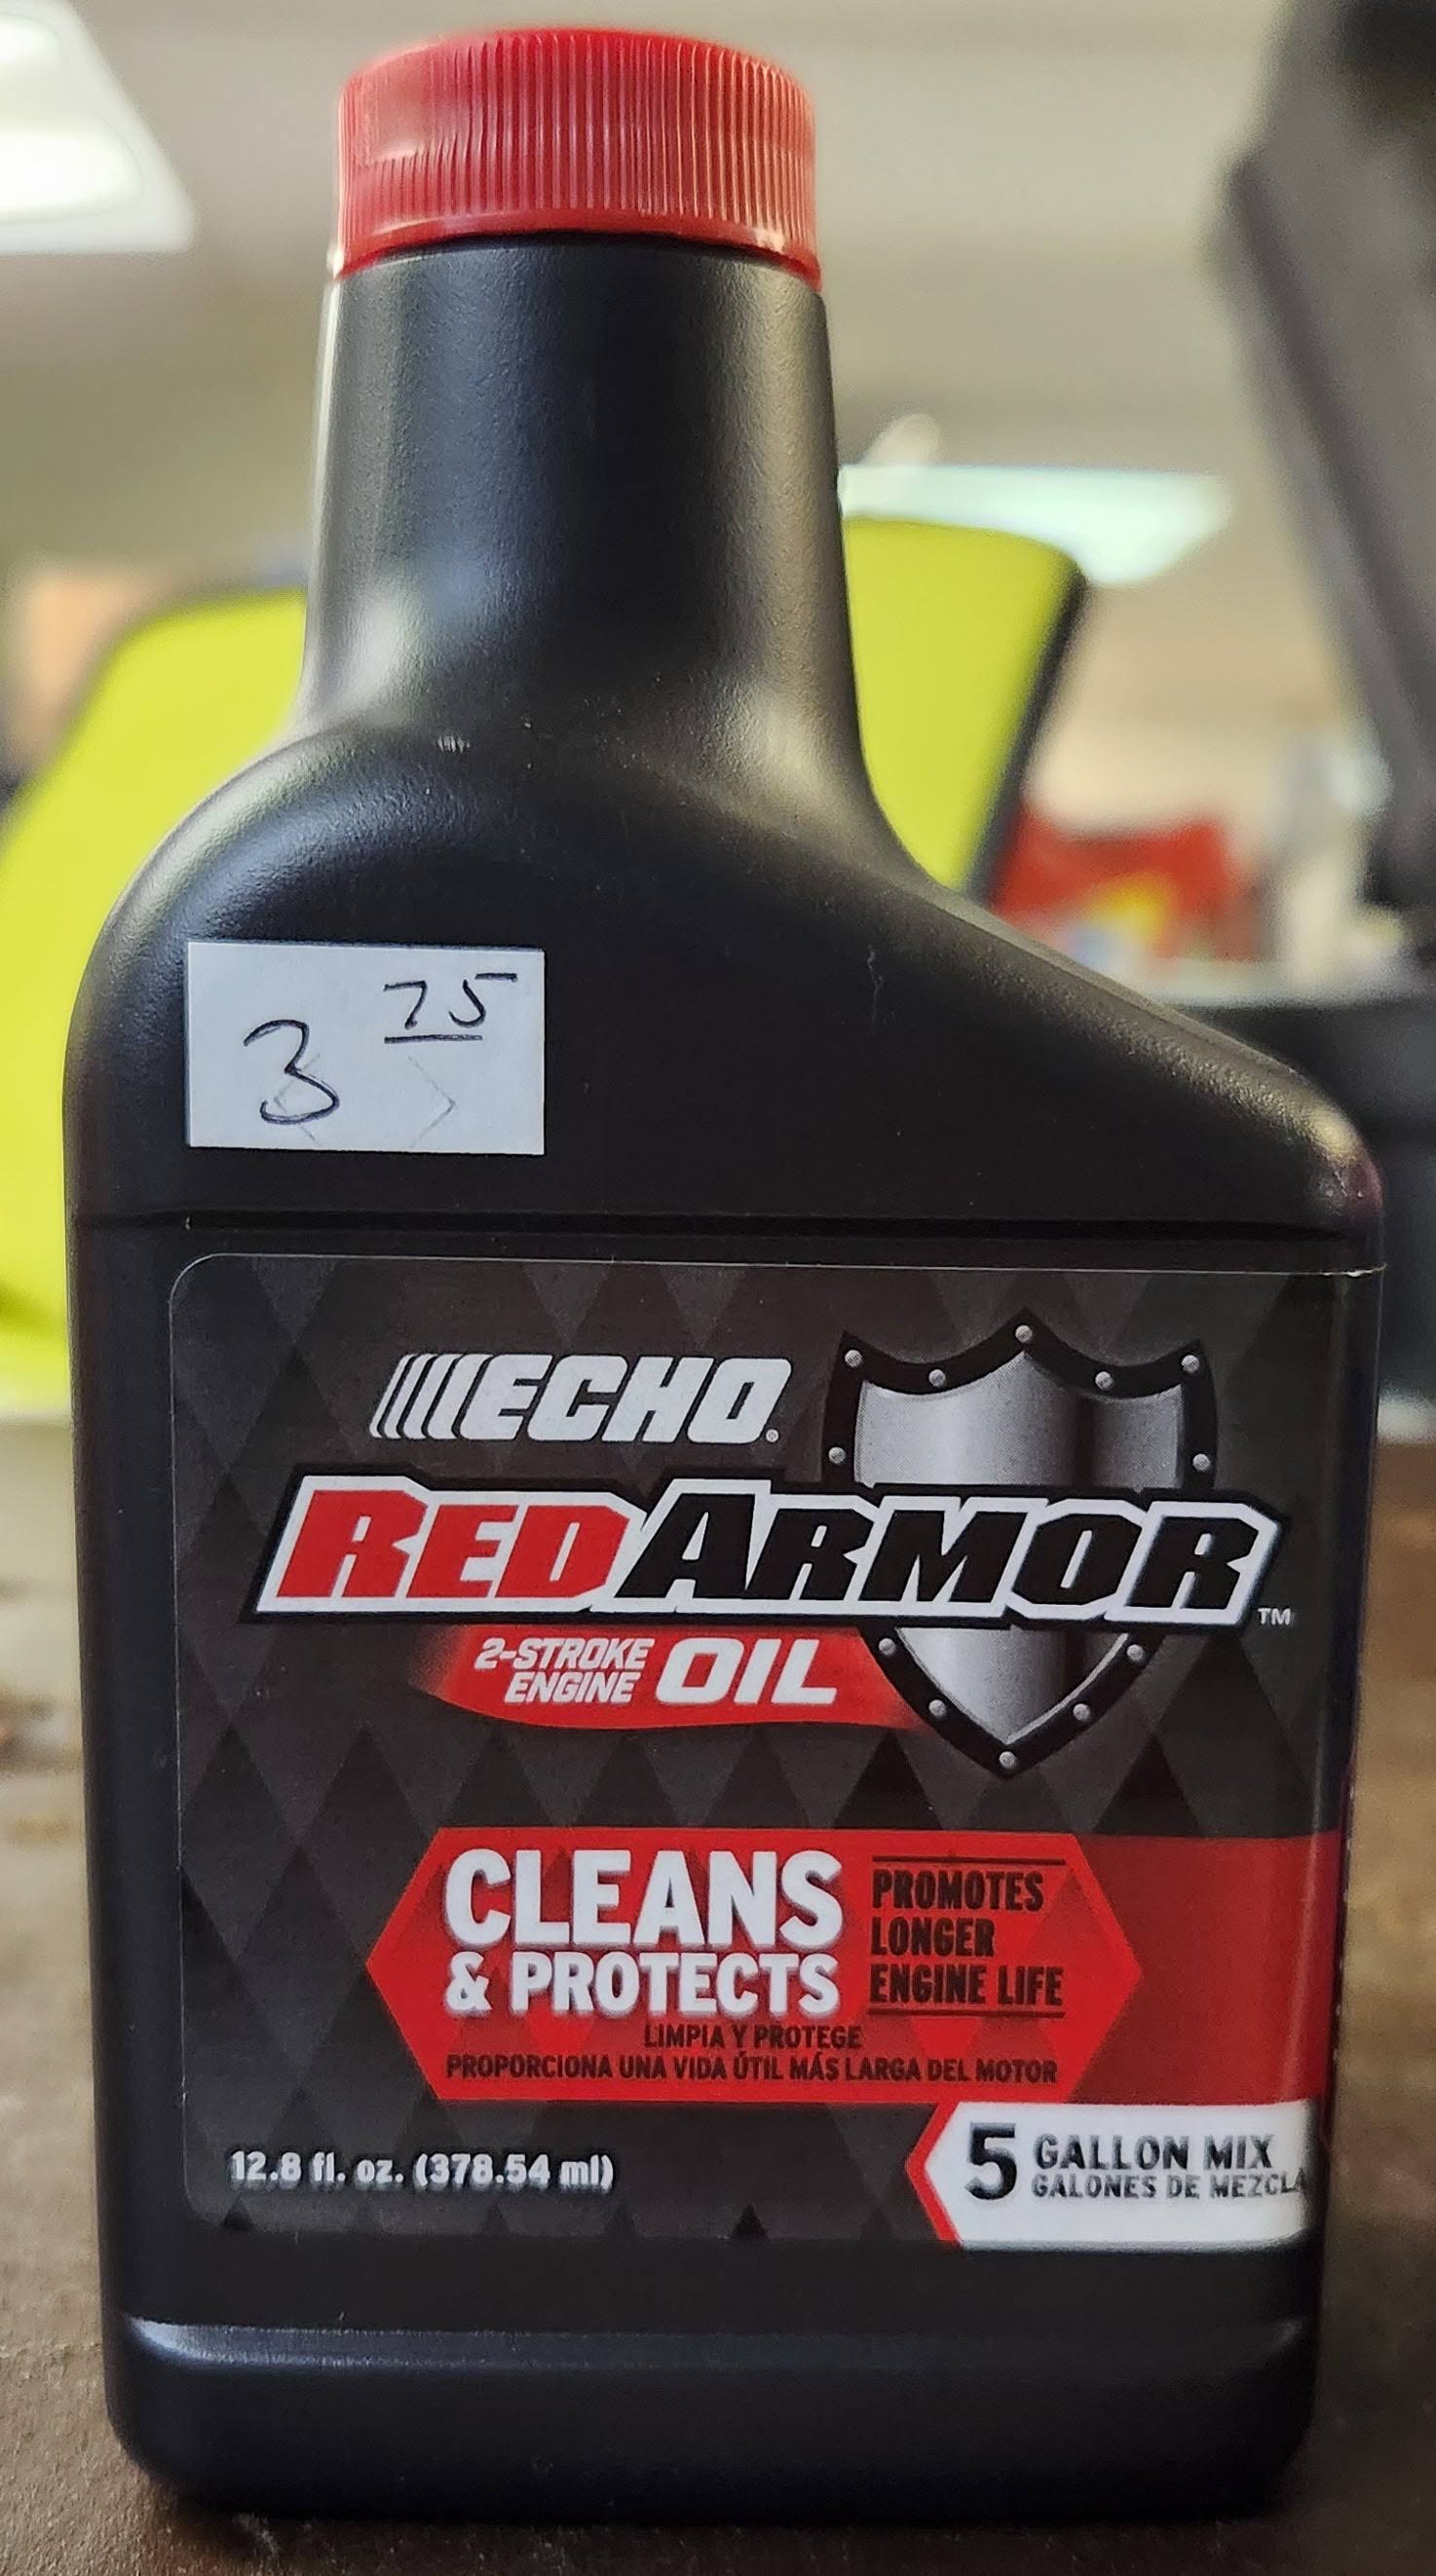 12.8-oz Red Armor 2-Cycle Oil Mix